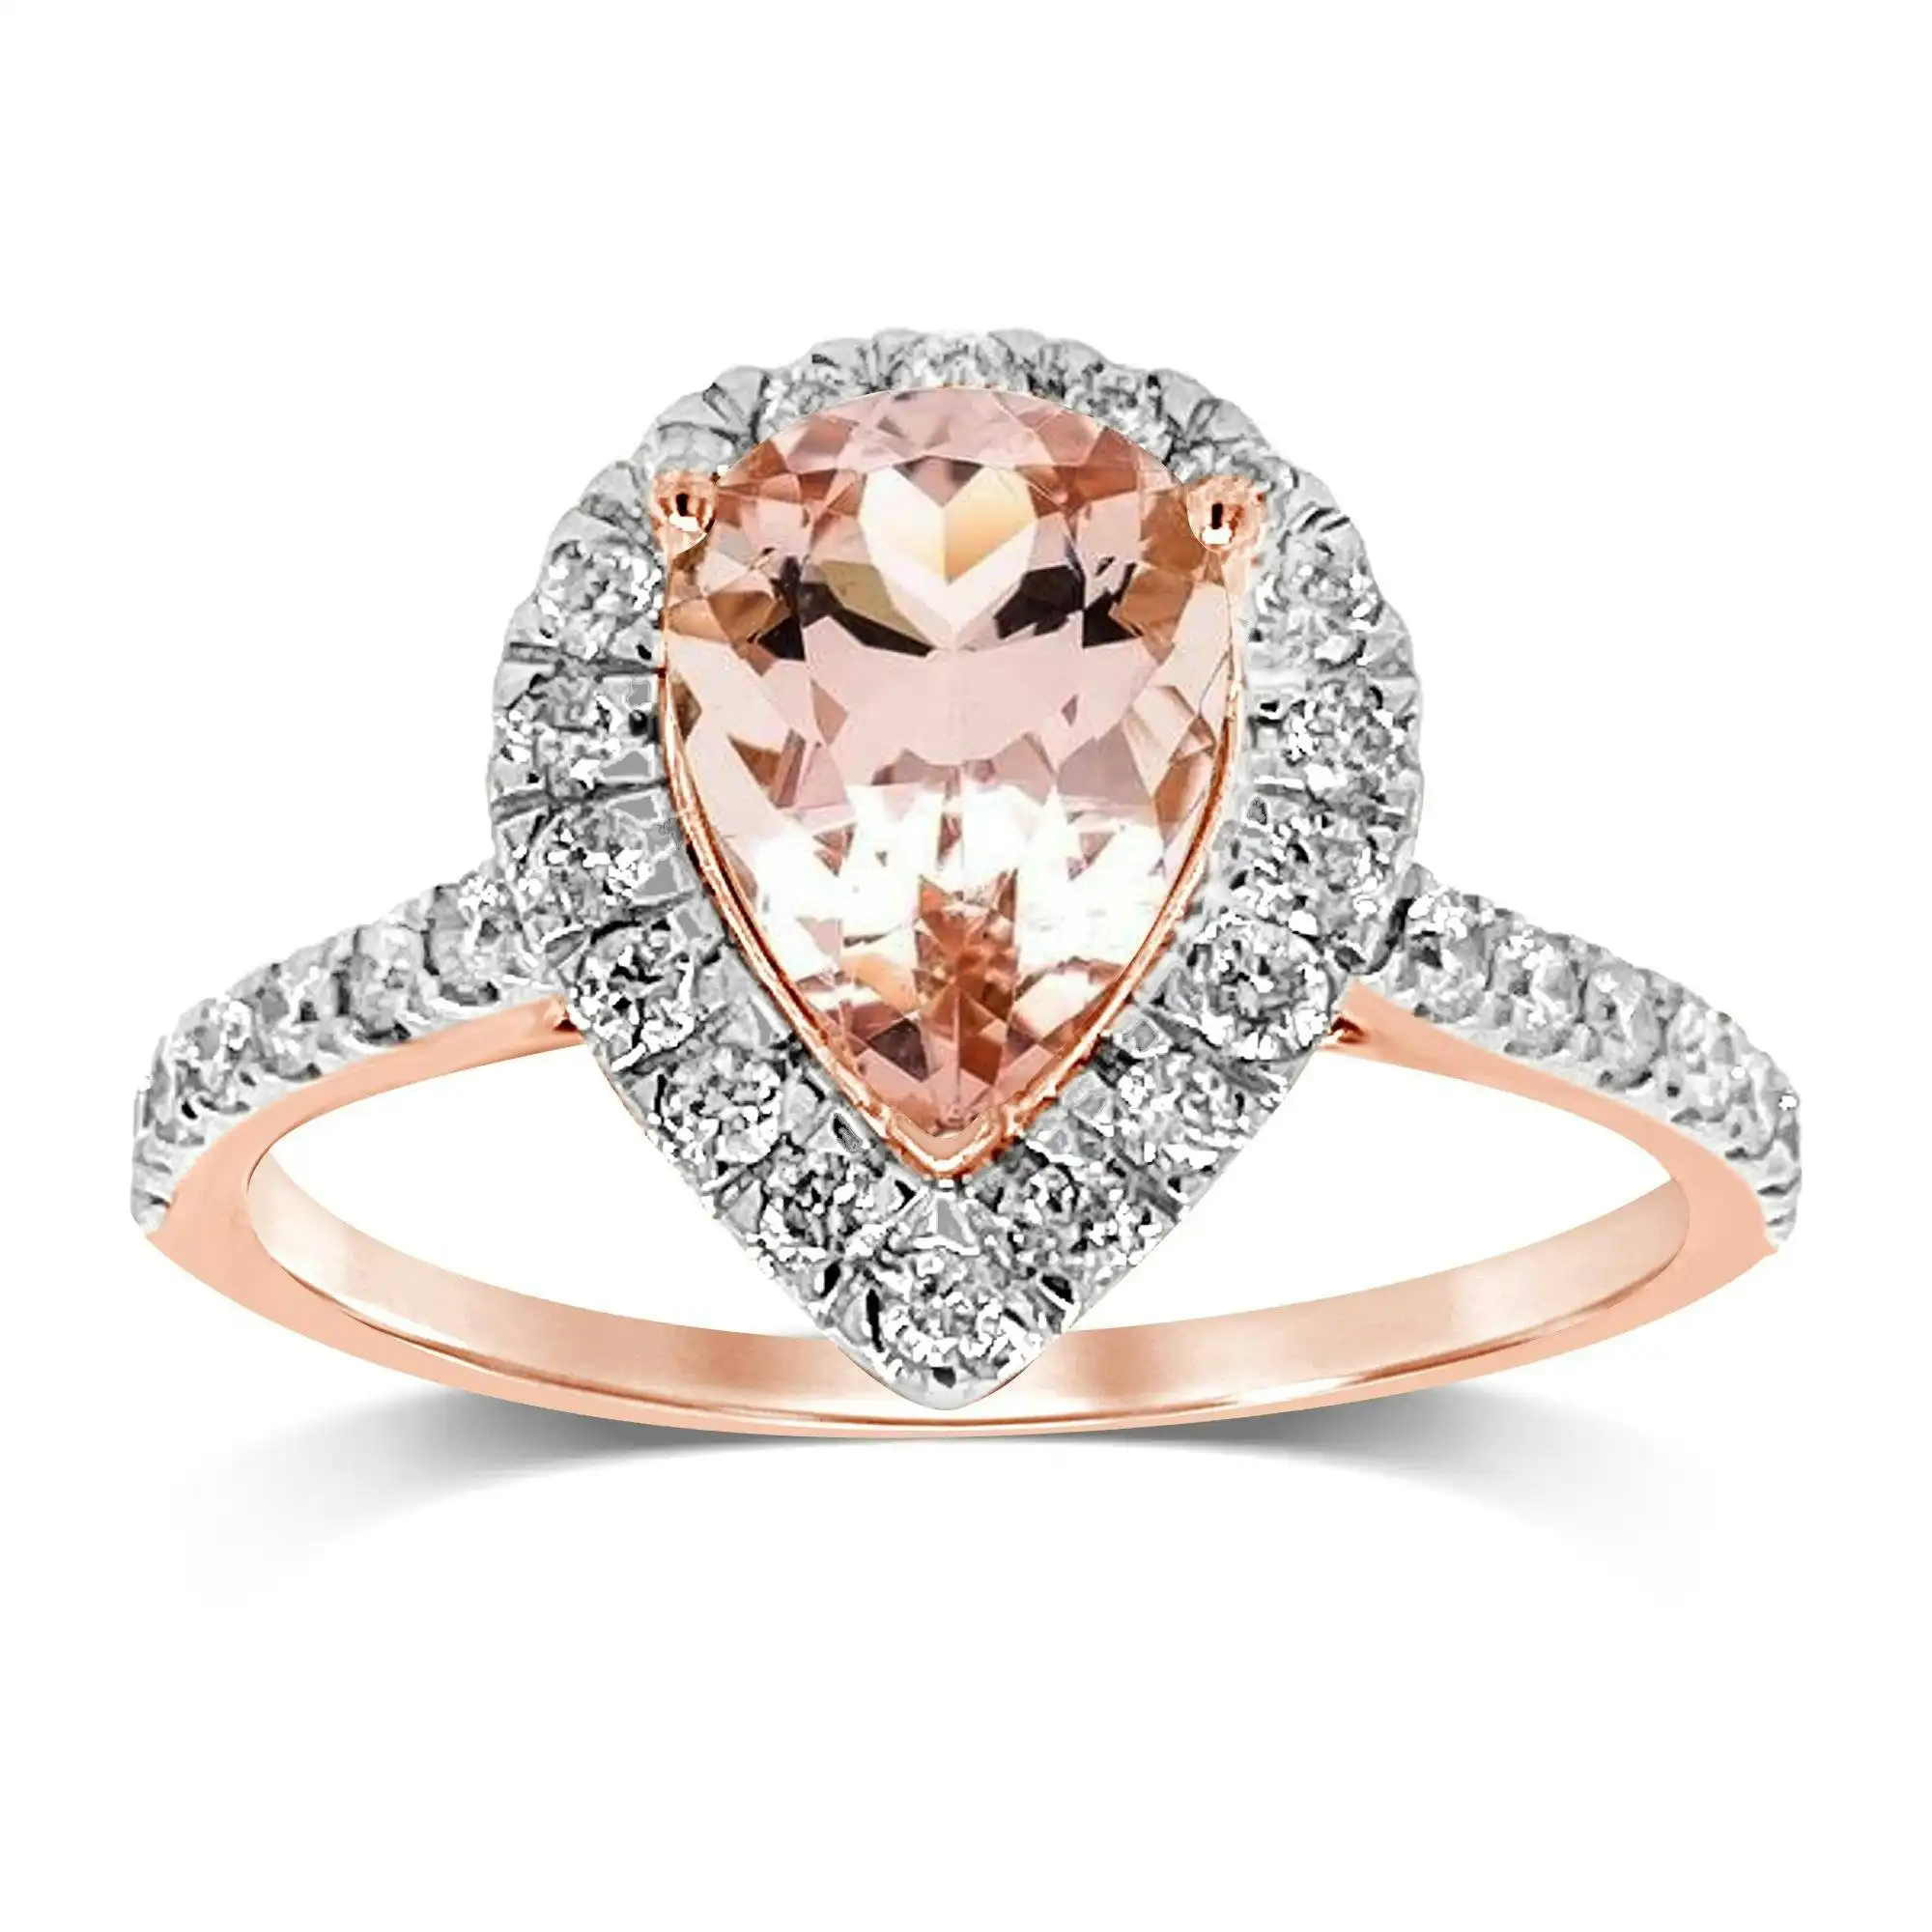 Pear Morganite Ring with 1.25ct of Diamonds in 9ct Rose Gold